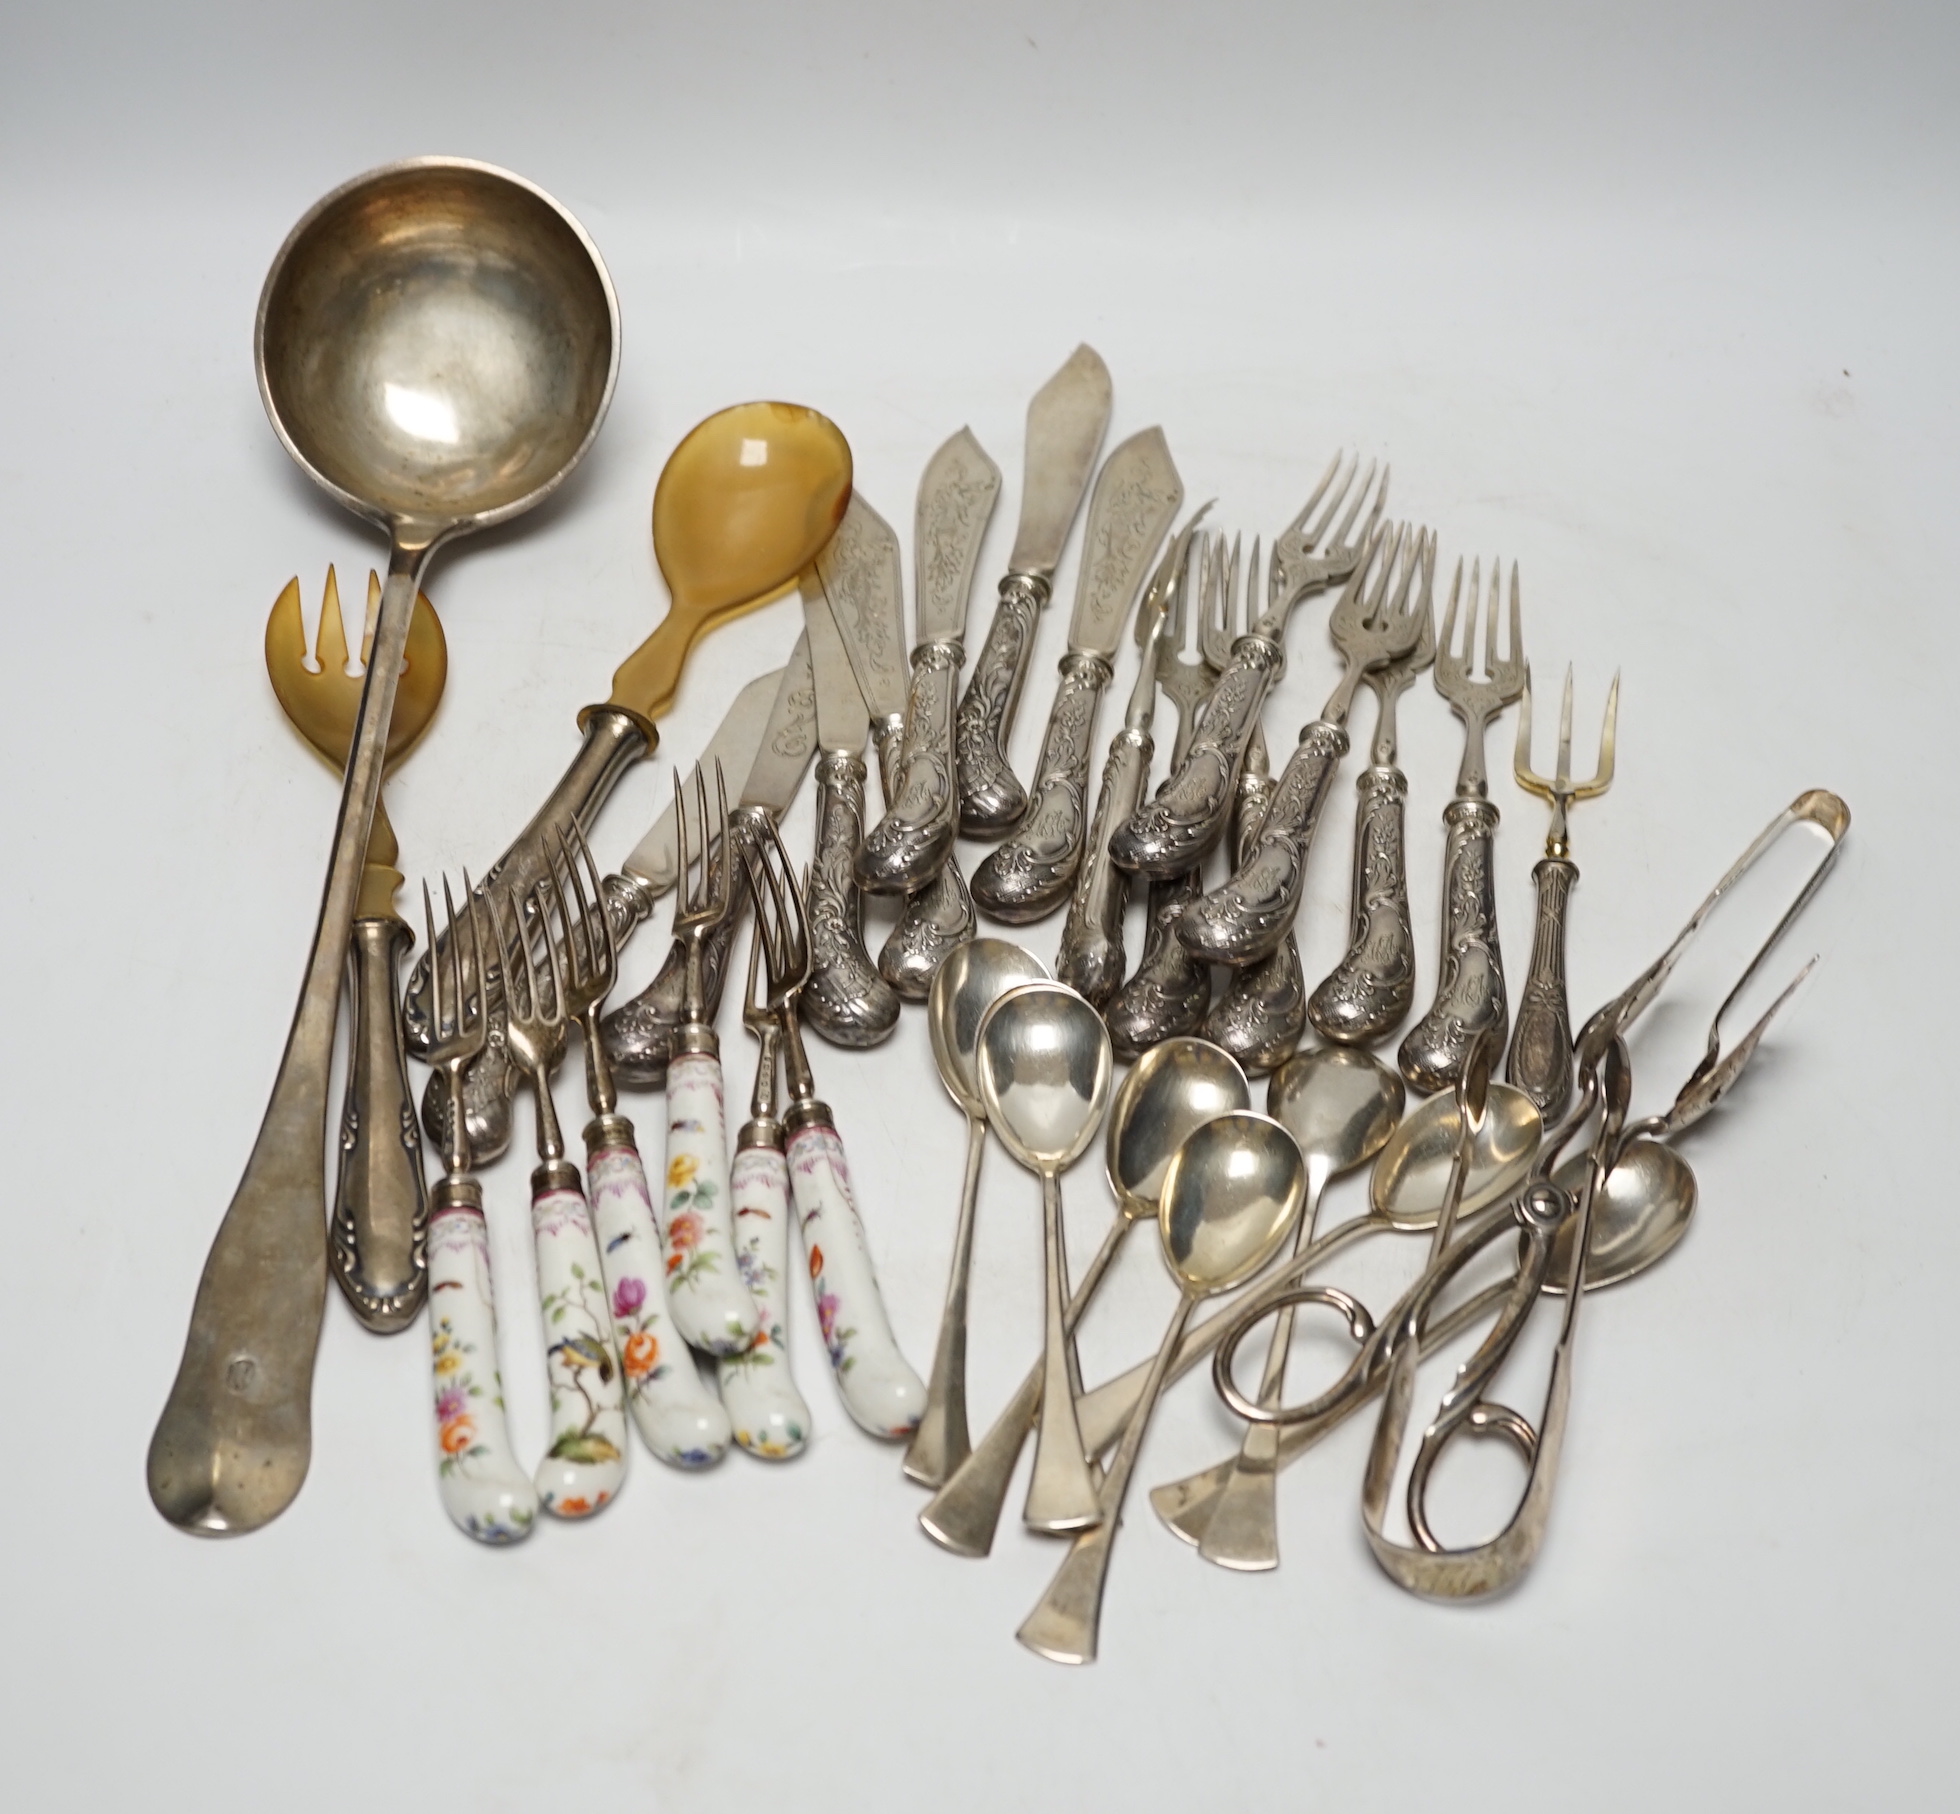 Six Victorian silver dessert forks by George Adams, London, 1880, with Meissen handles, 17.5cm(a.f.), eight 800 standard sorbet spoons, seven pairs of Austro-Hungarian white metal fish eaters, five other continental item